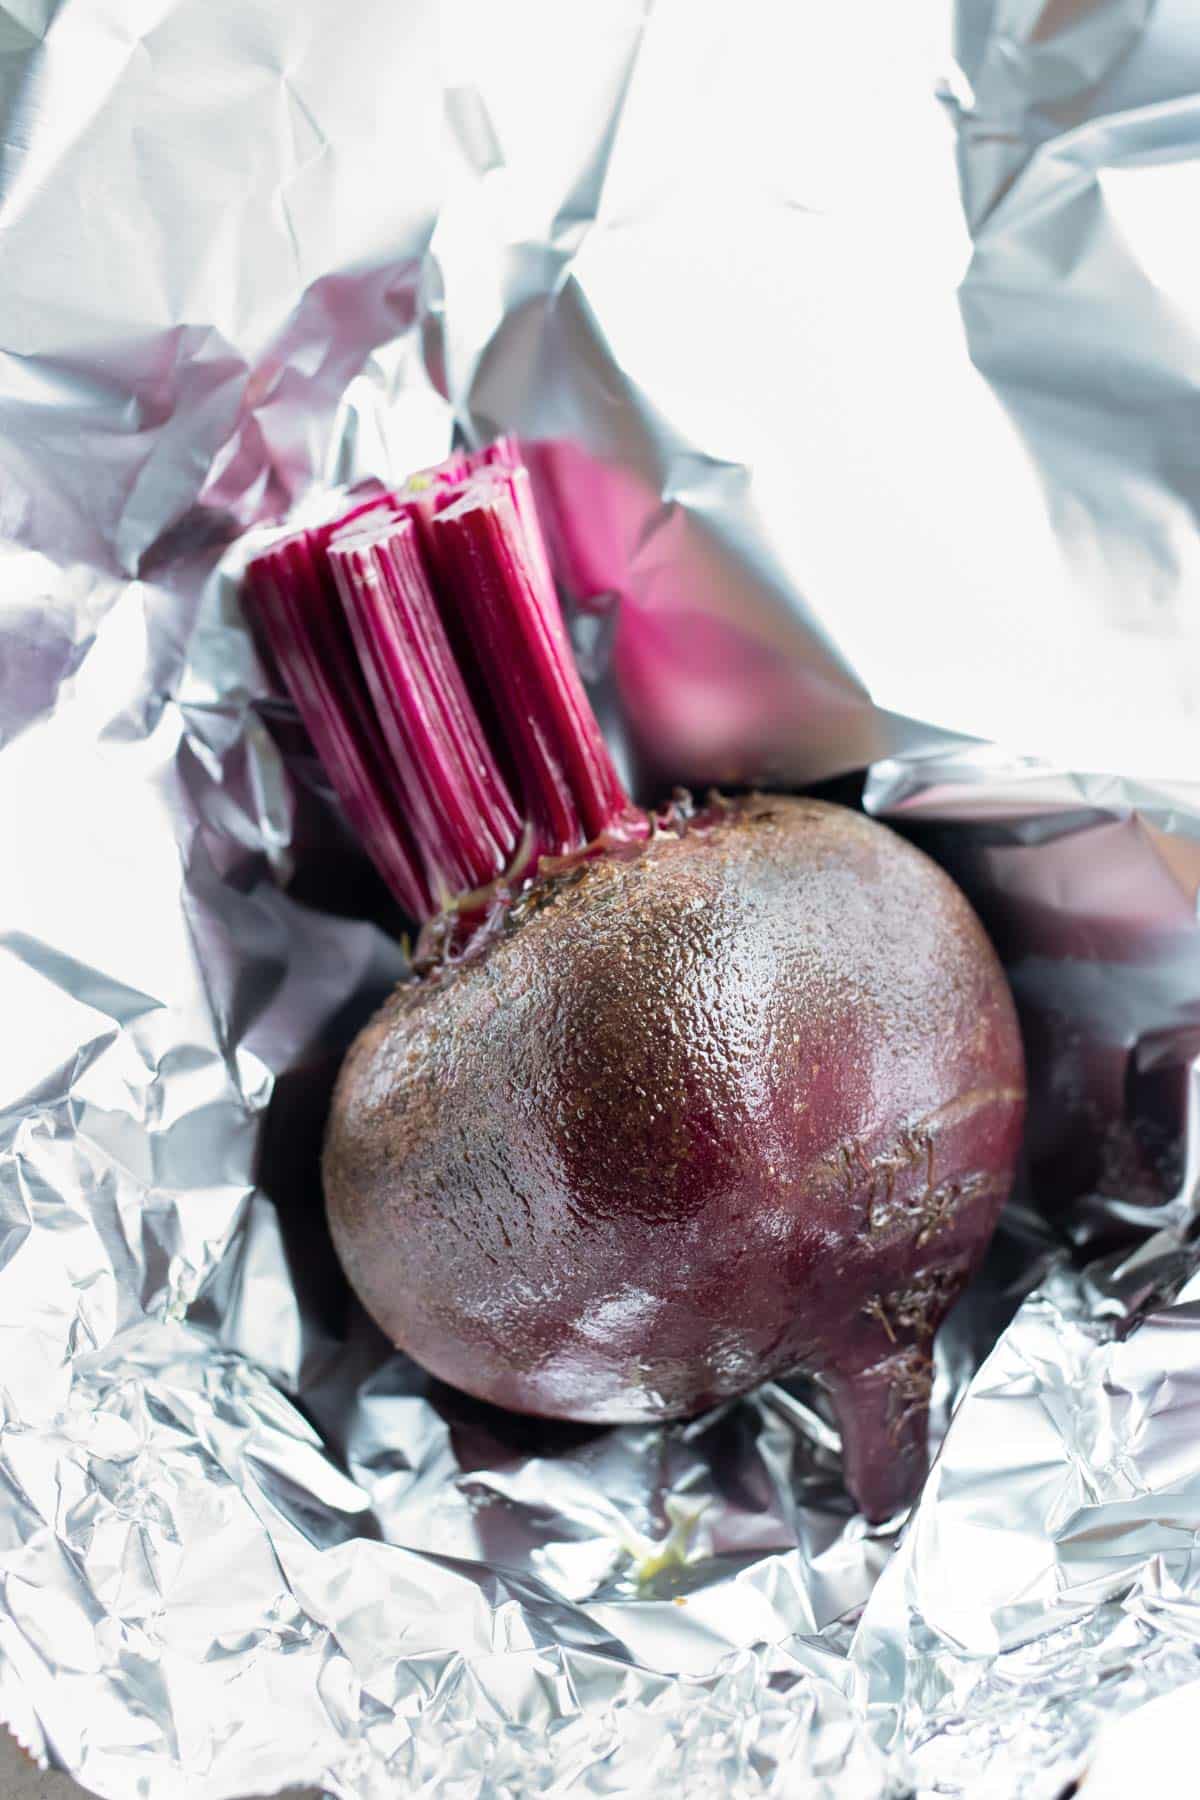 Oil covered beets are wrapped in foil before roasting.